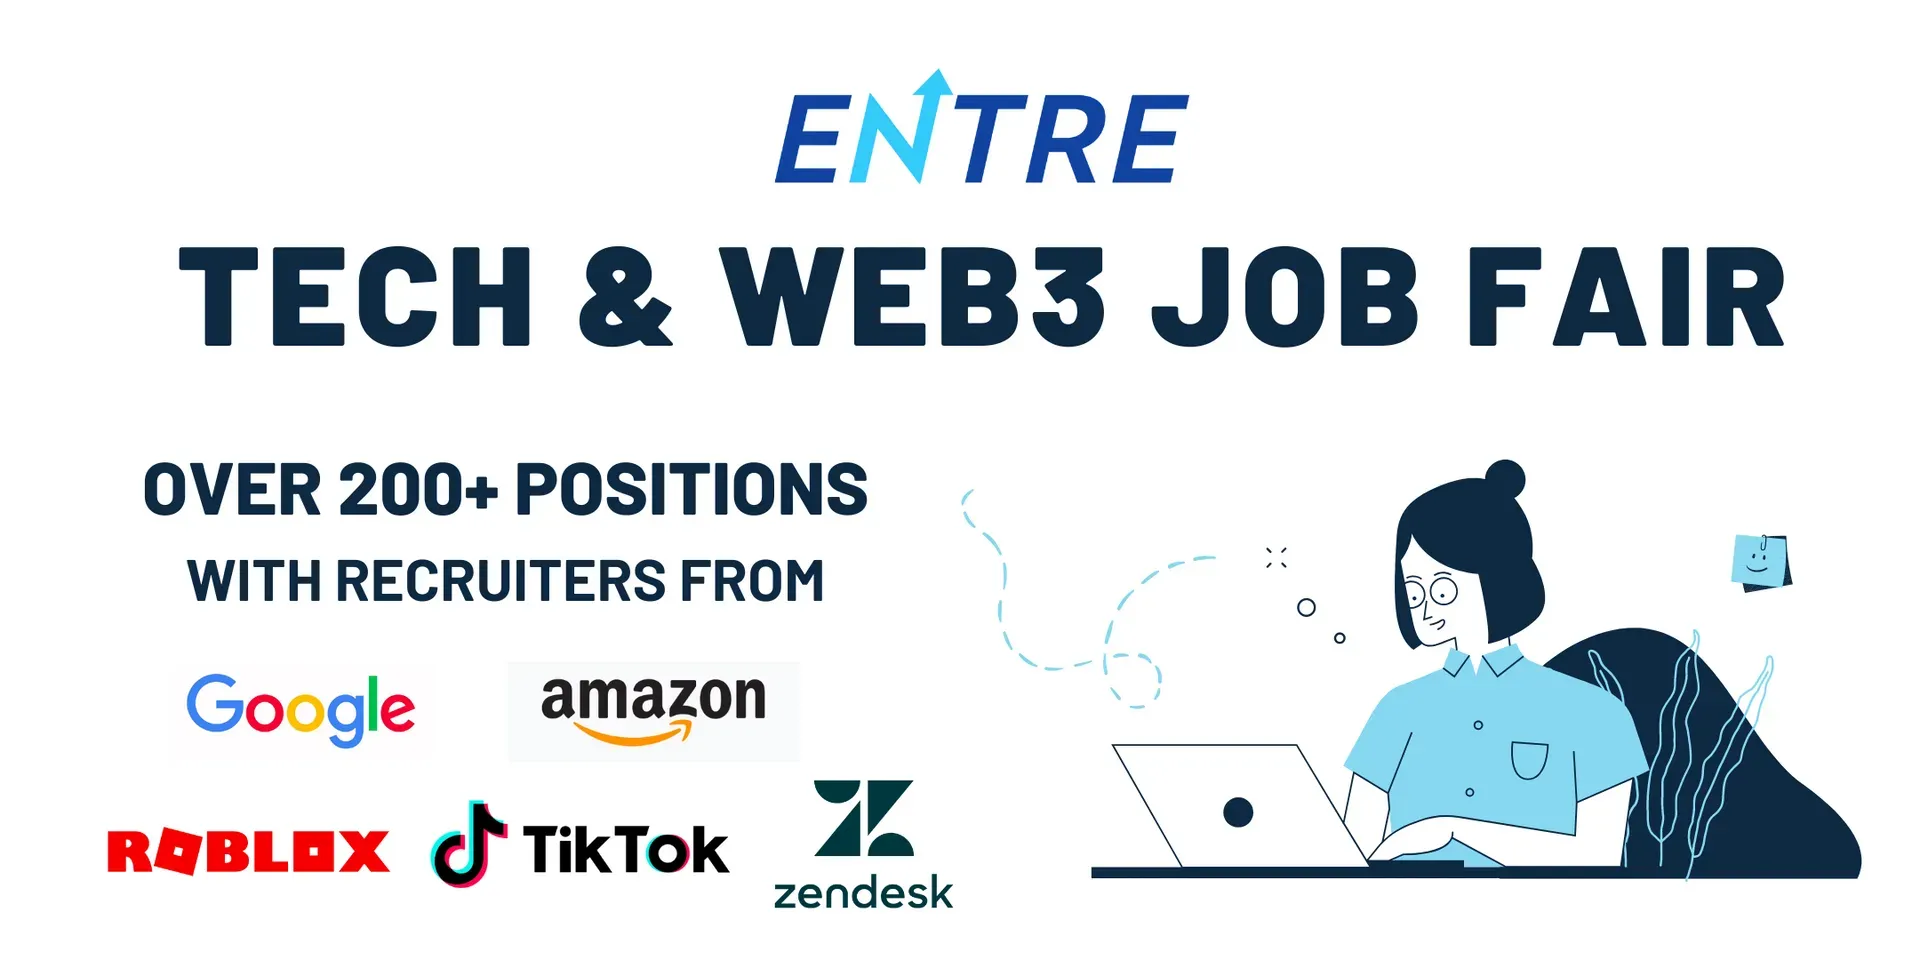 Hey everyone! Don't forget our monthly Tech & Web3 Job Fair is coming up. Don't forget to get your ticket and mark your calendar for: 

Date:  August 30th 
Time: 4pm Pacific Time
Link: https://joinentre.com/event/629134b6016a850009036ea6